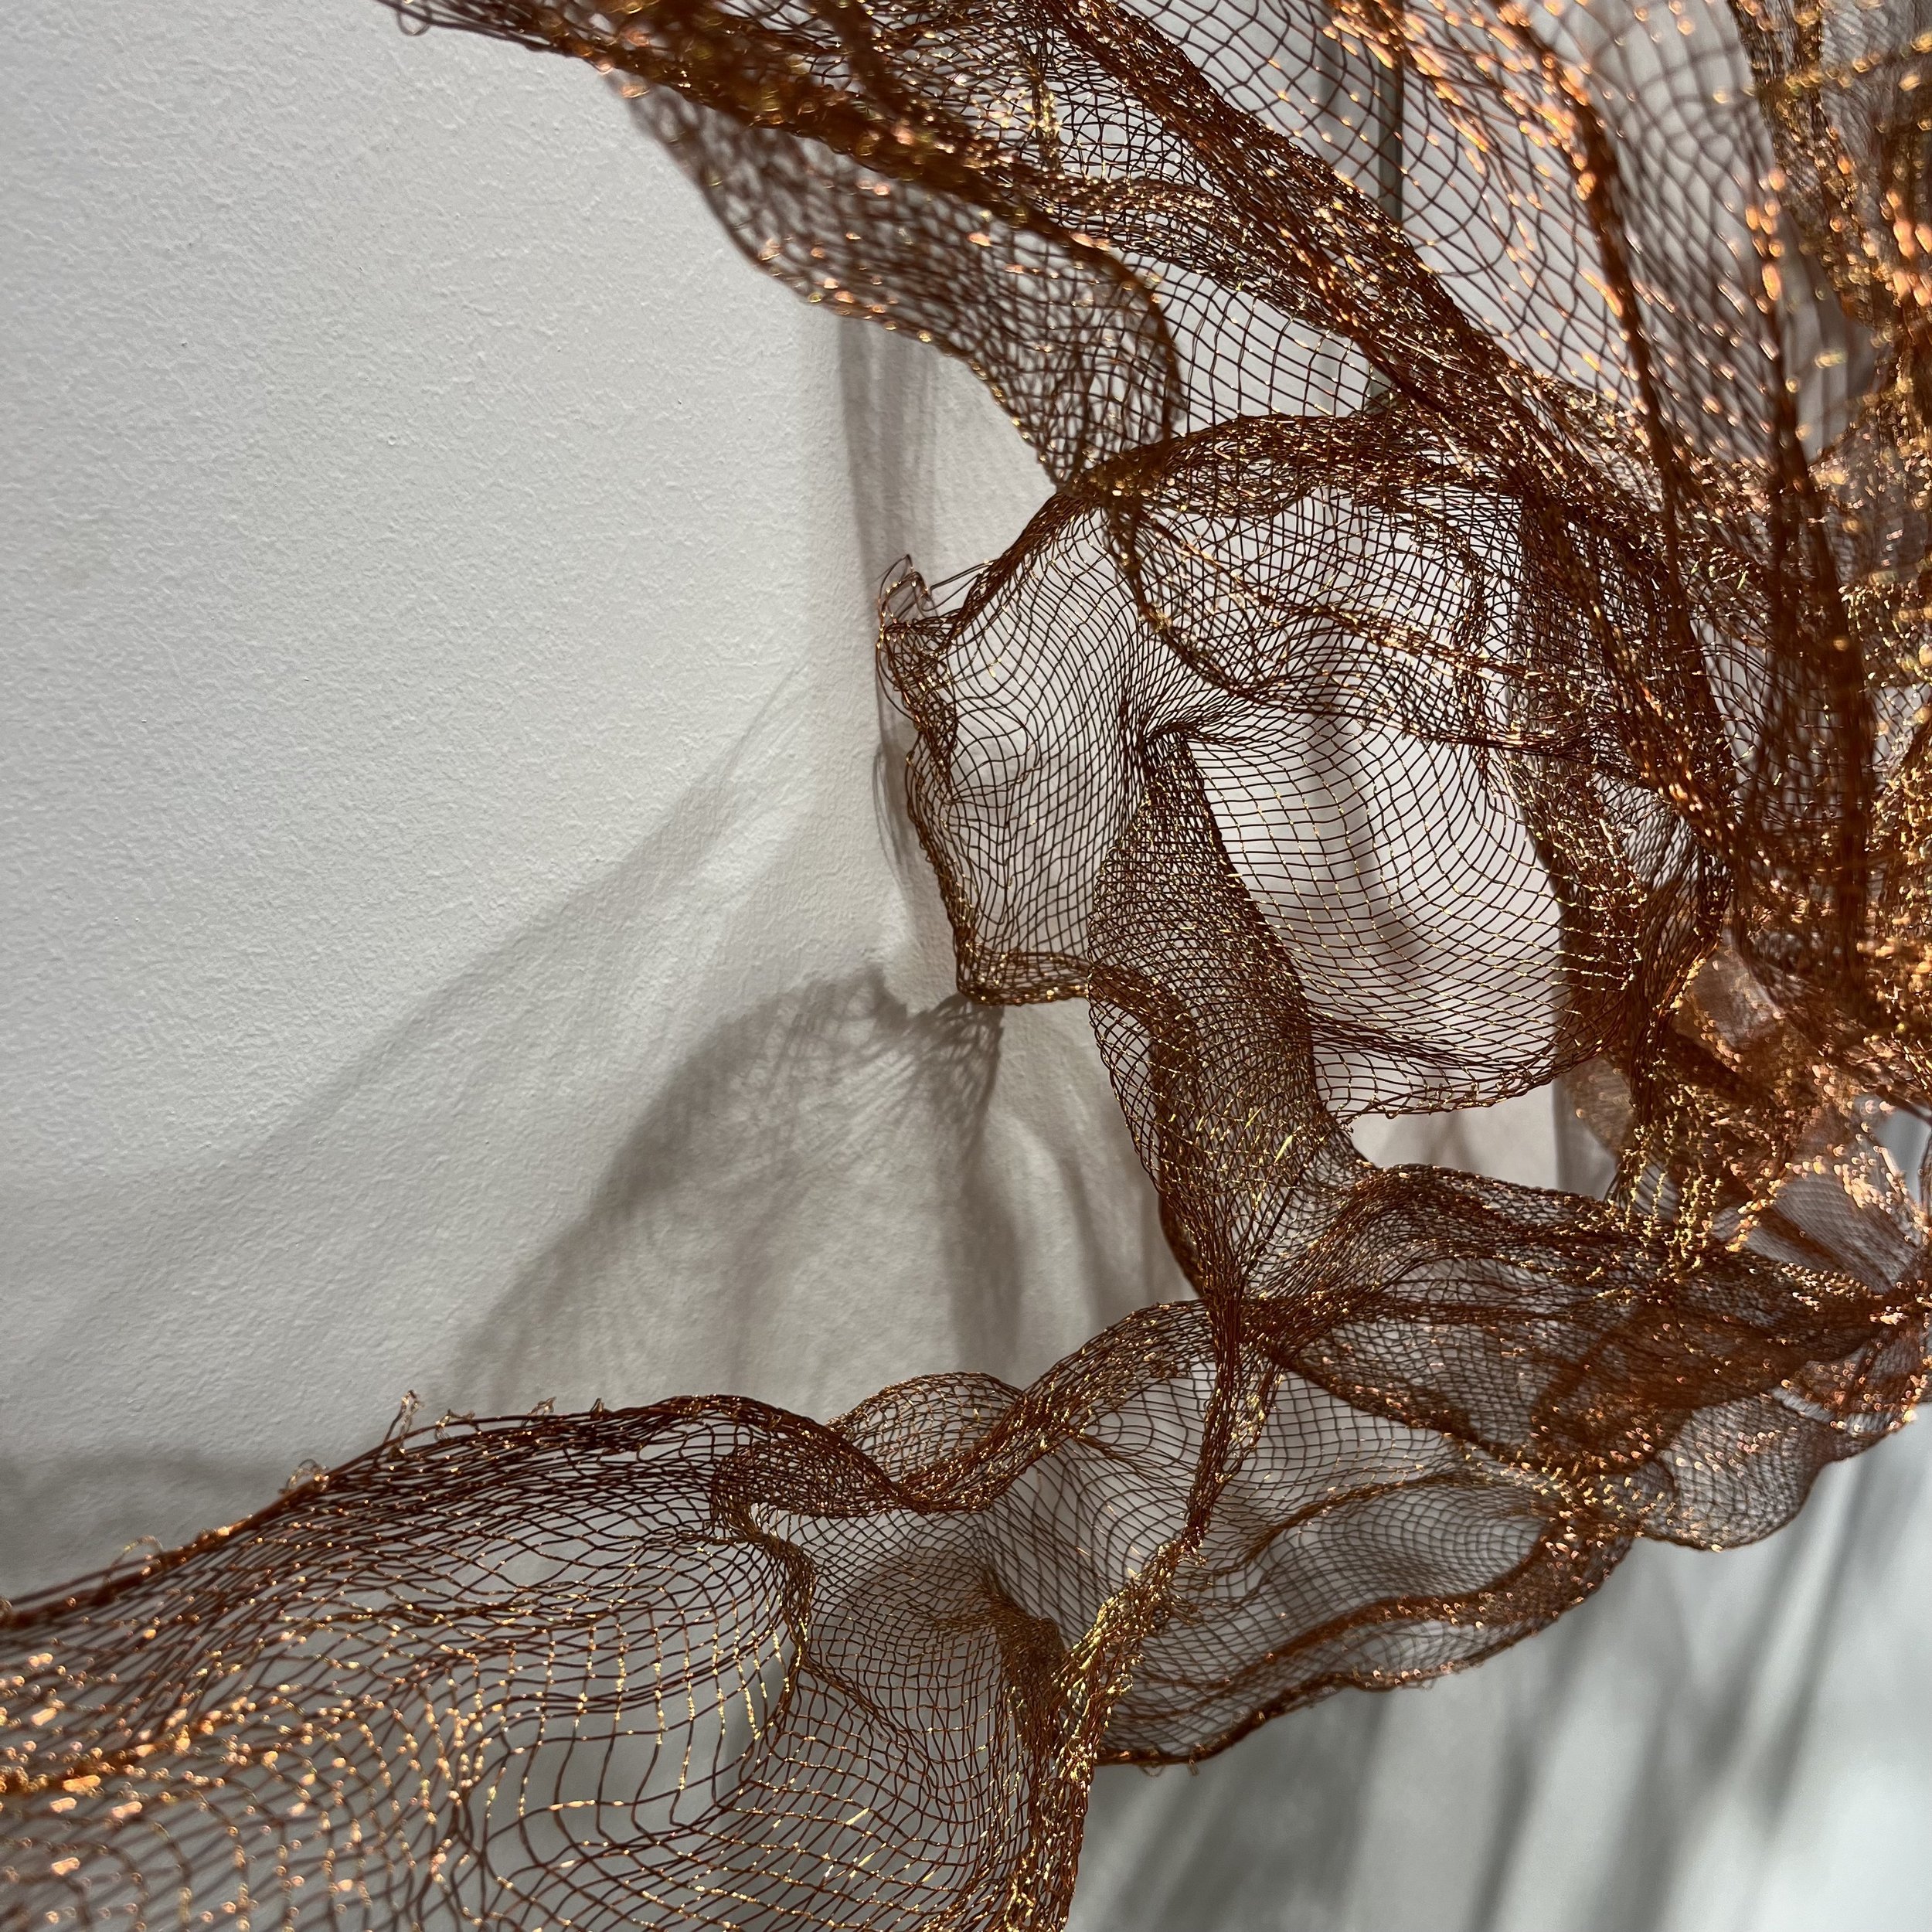   Untitled, woven by Sylvia Ptak 